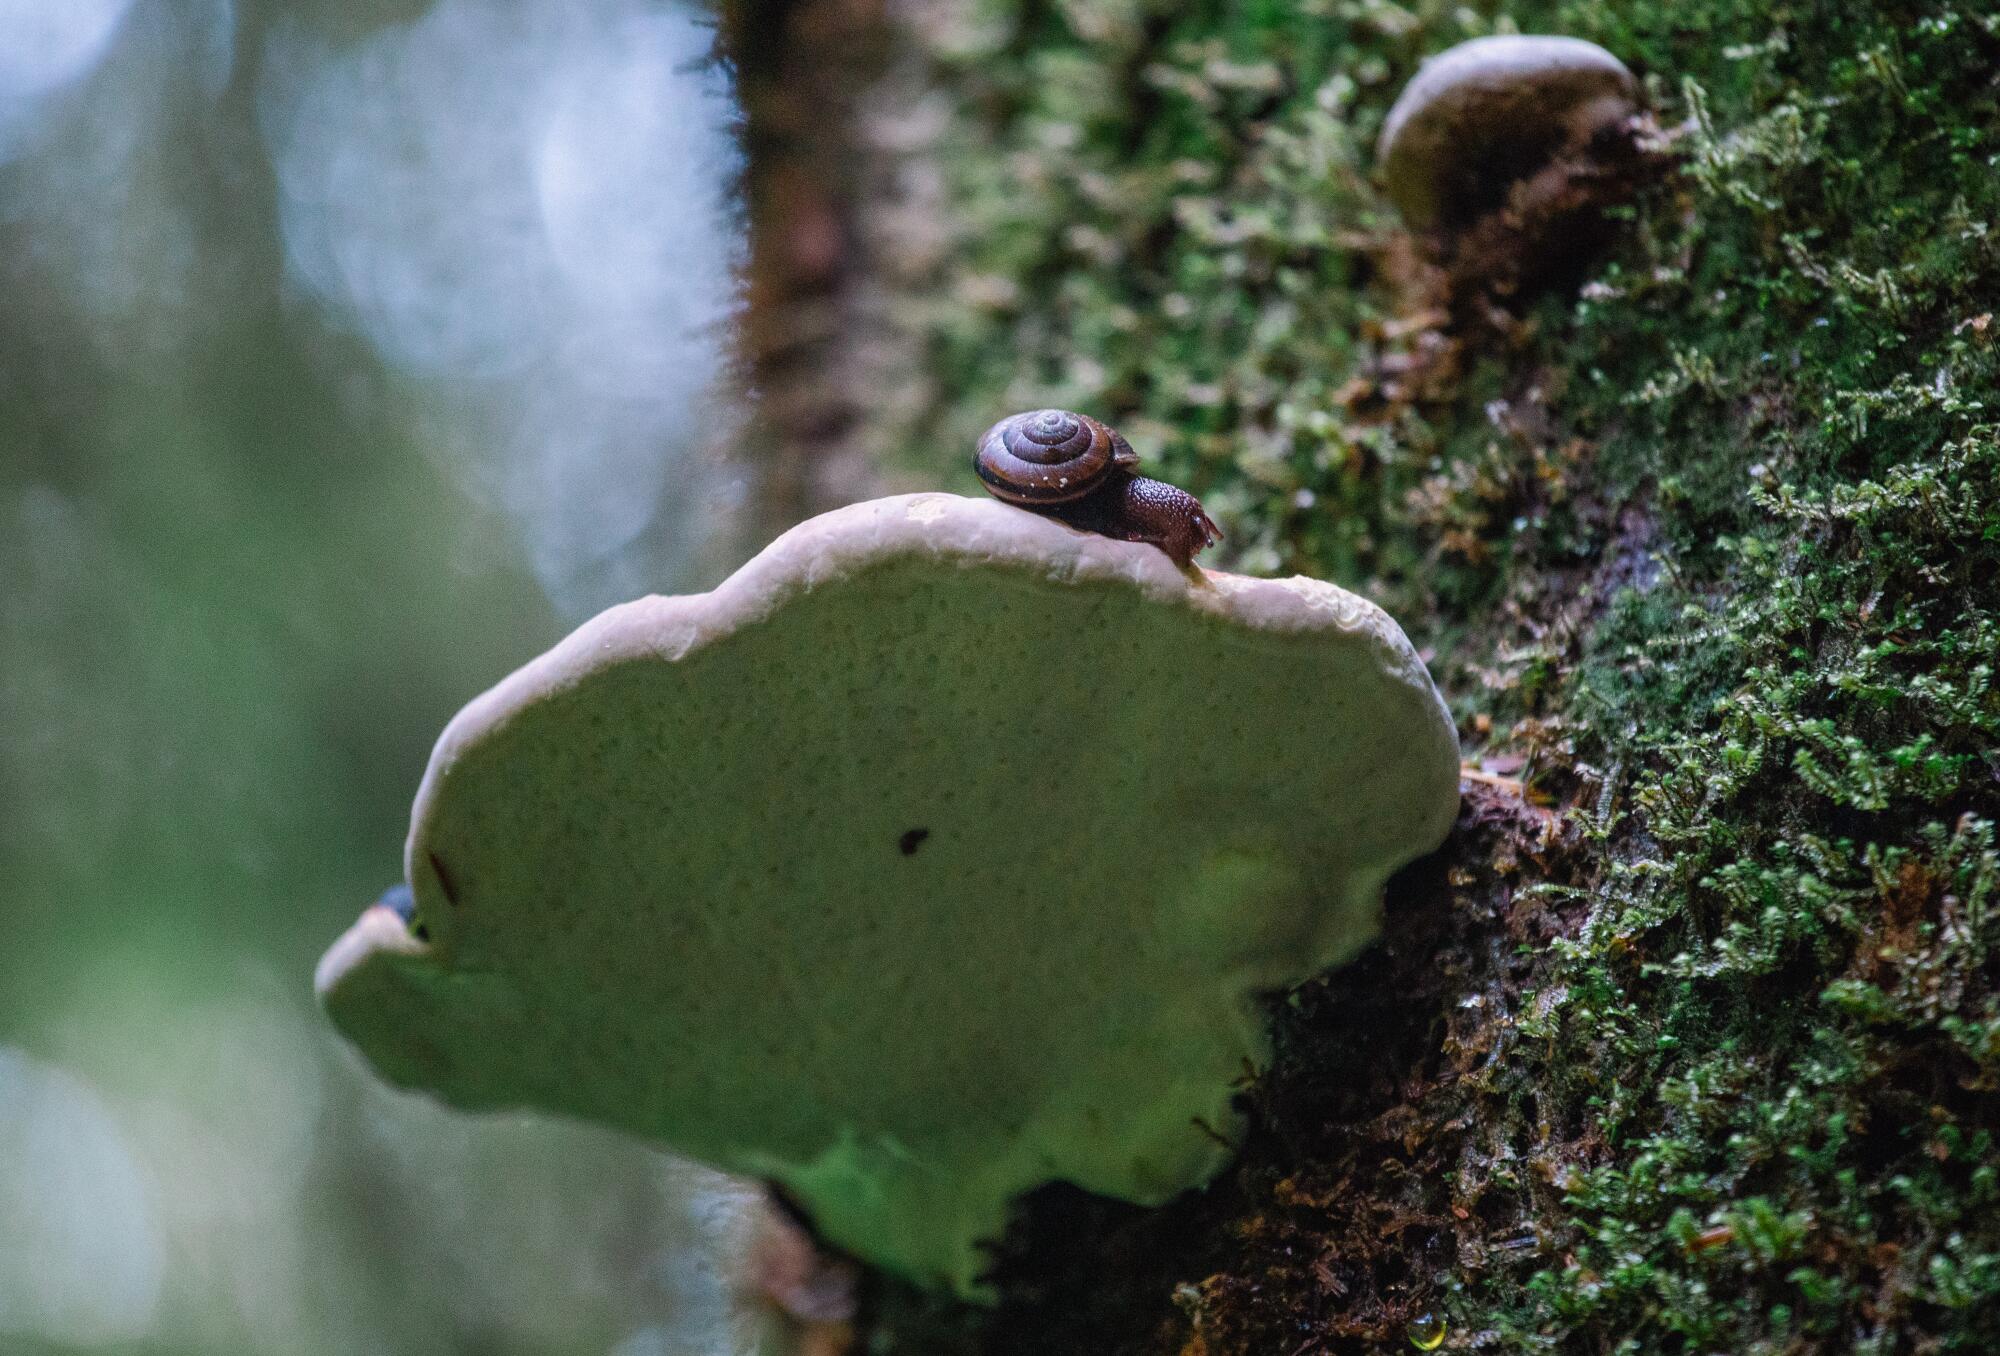 A snail slithers along a fungus growing on a redwood.